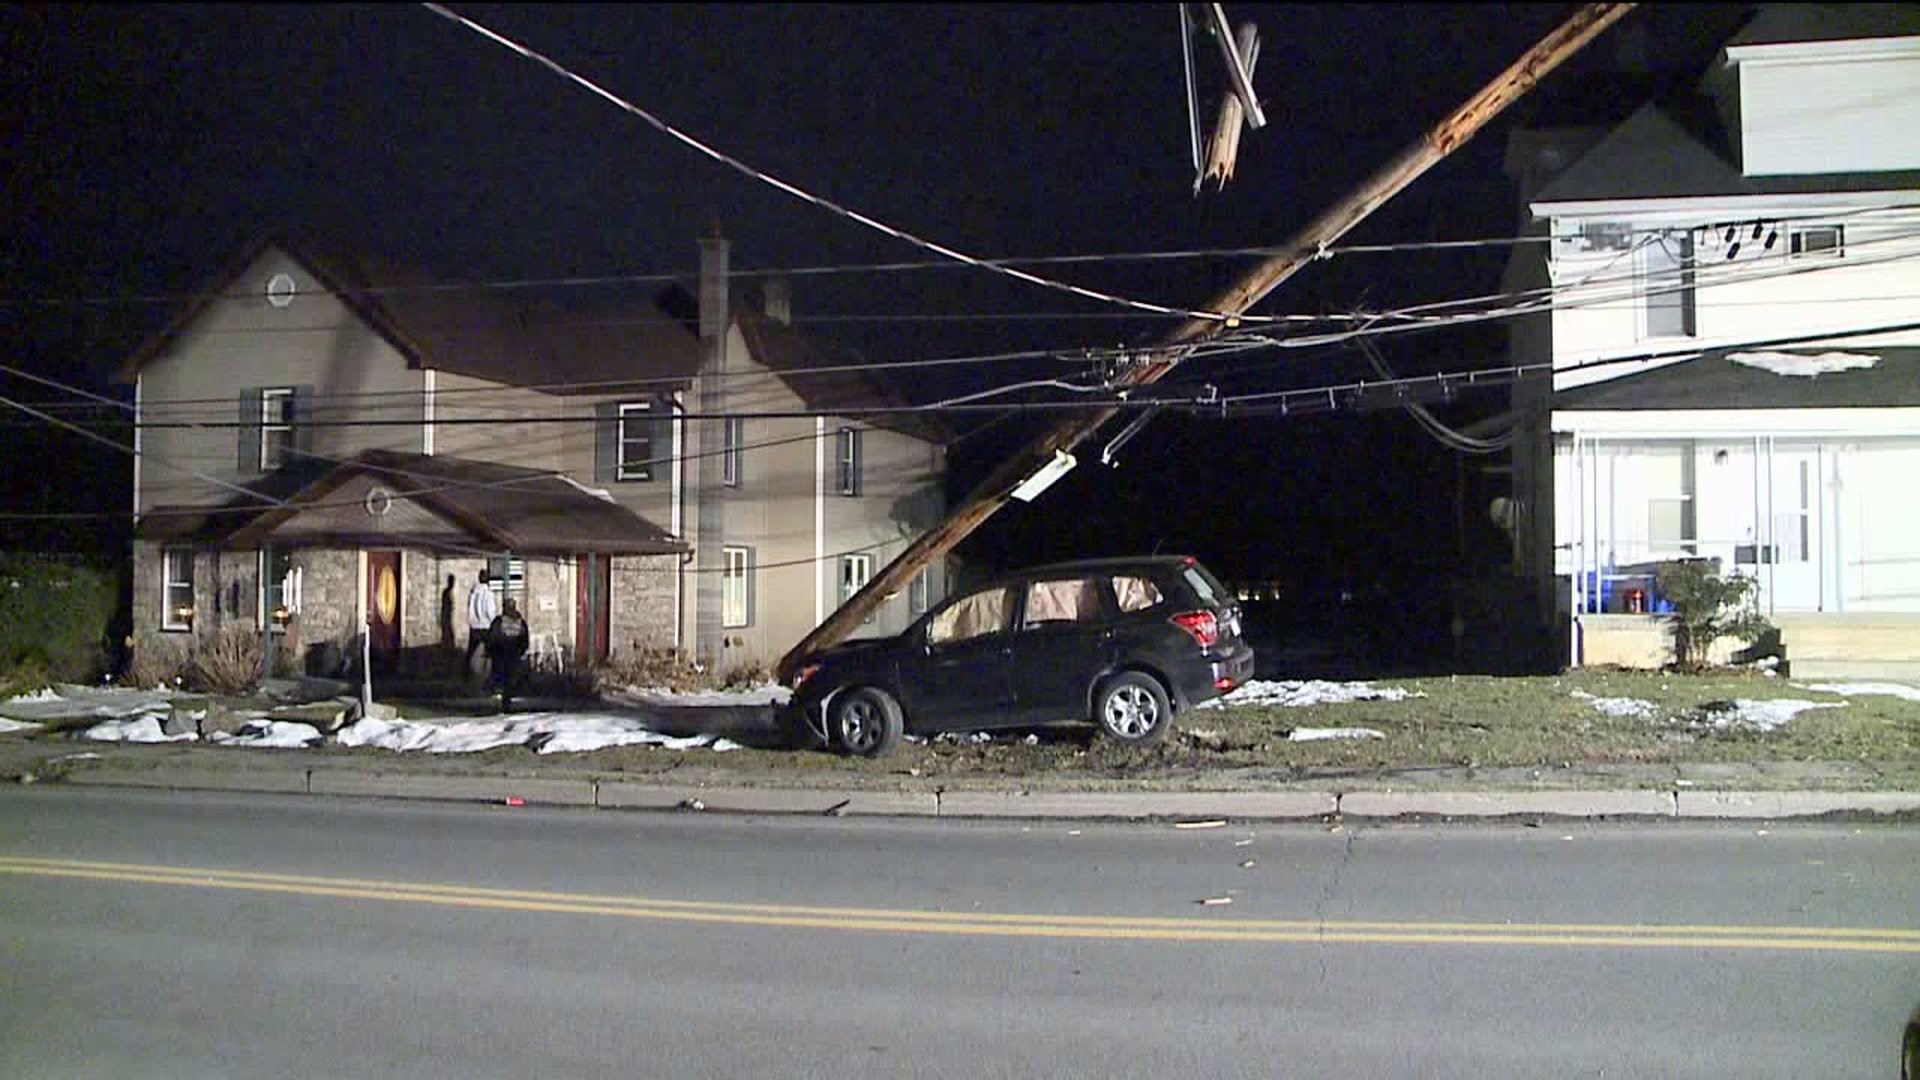 Crash Brings Down Utility Pole, Wires in Olyphant